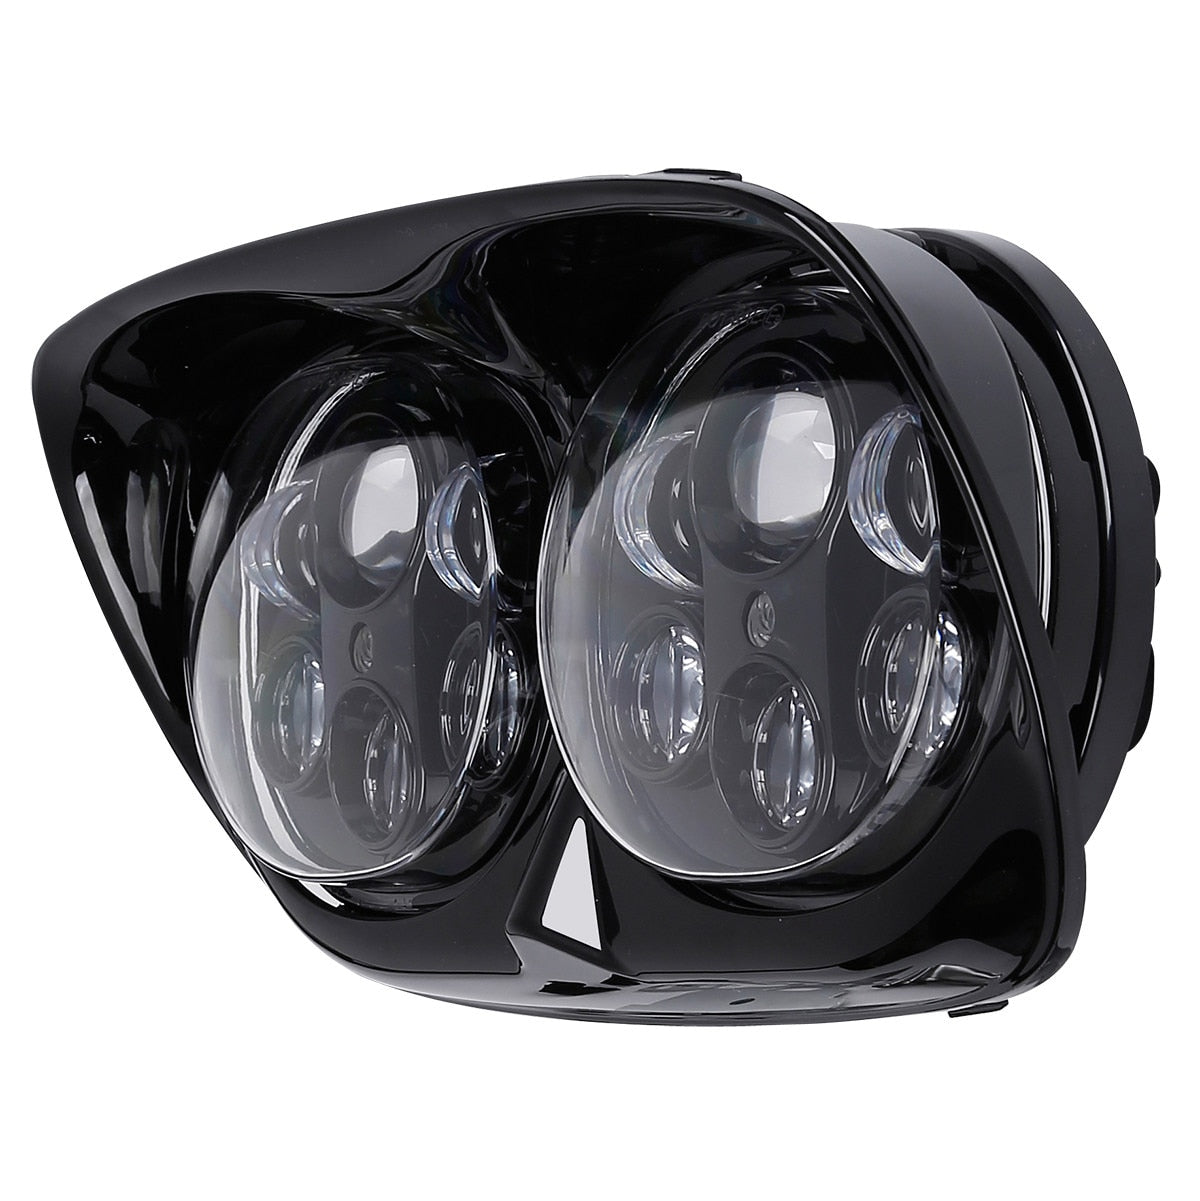 Voodoo Cycle House 5-3/4" LED Headlight For Harley-Davidson Road Glide FLTR 1998-2013